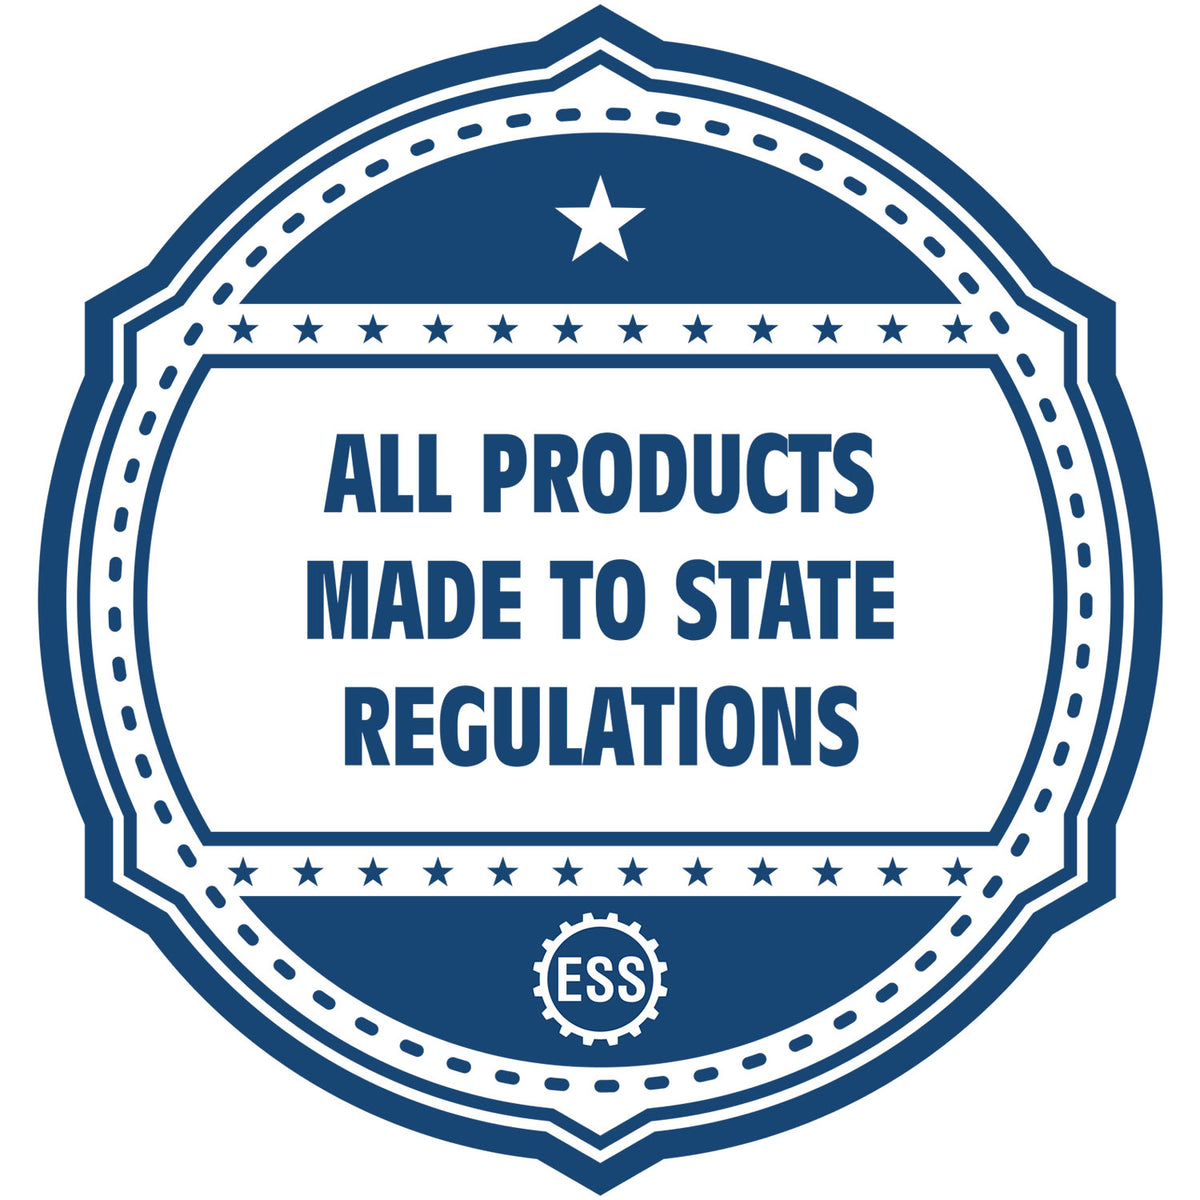 An icon or badge element for the Self-Inking Rectangular Wyoming Notary Stamp showing that this product is made in compliance with state regulations.